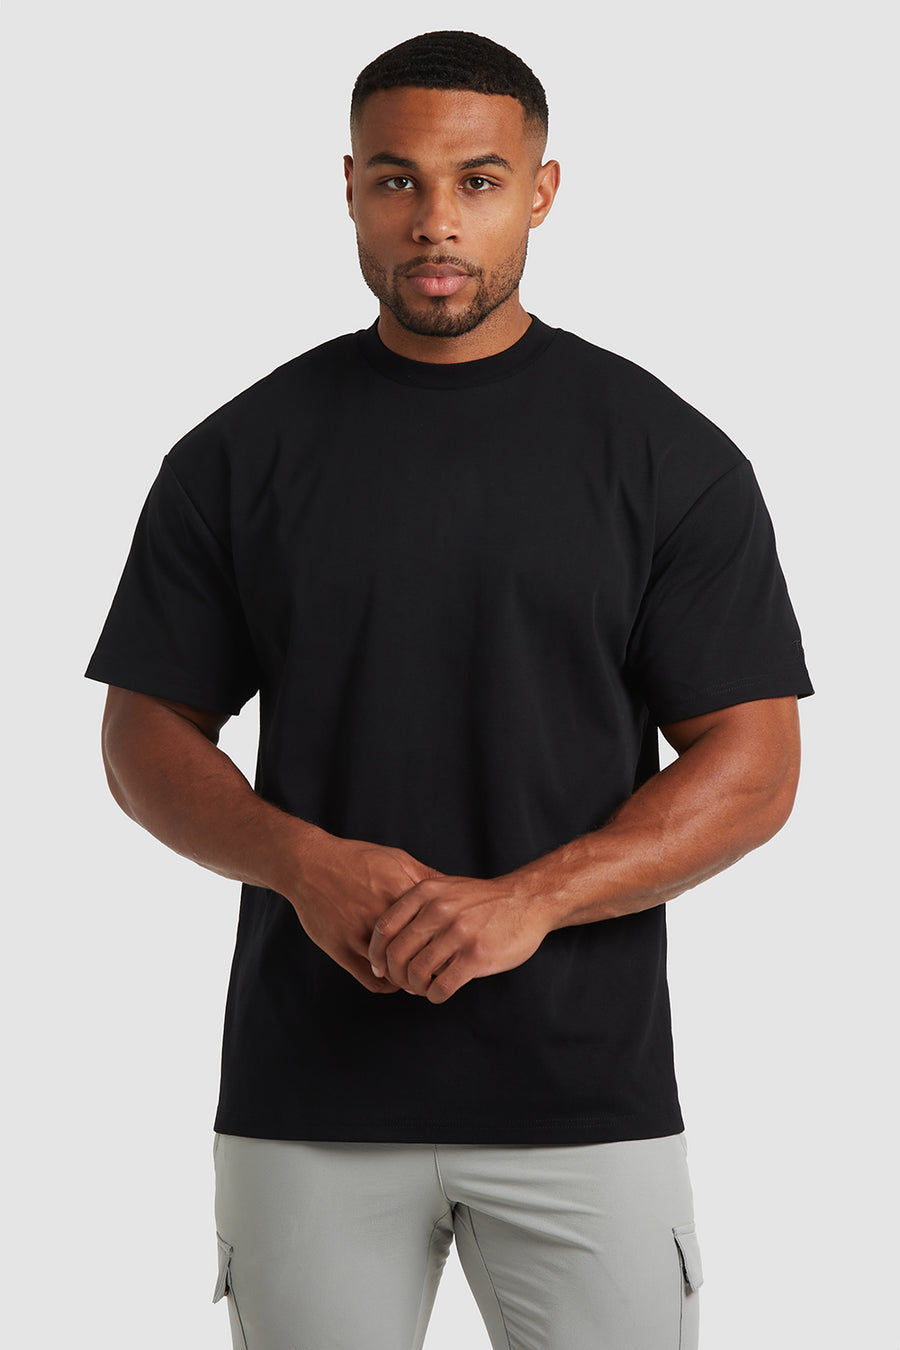 Boxy Fit T-Shirt in Black - TAILORED ATHLETE - USA